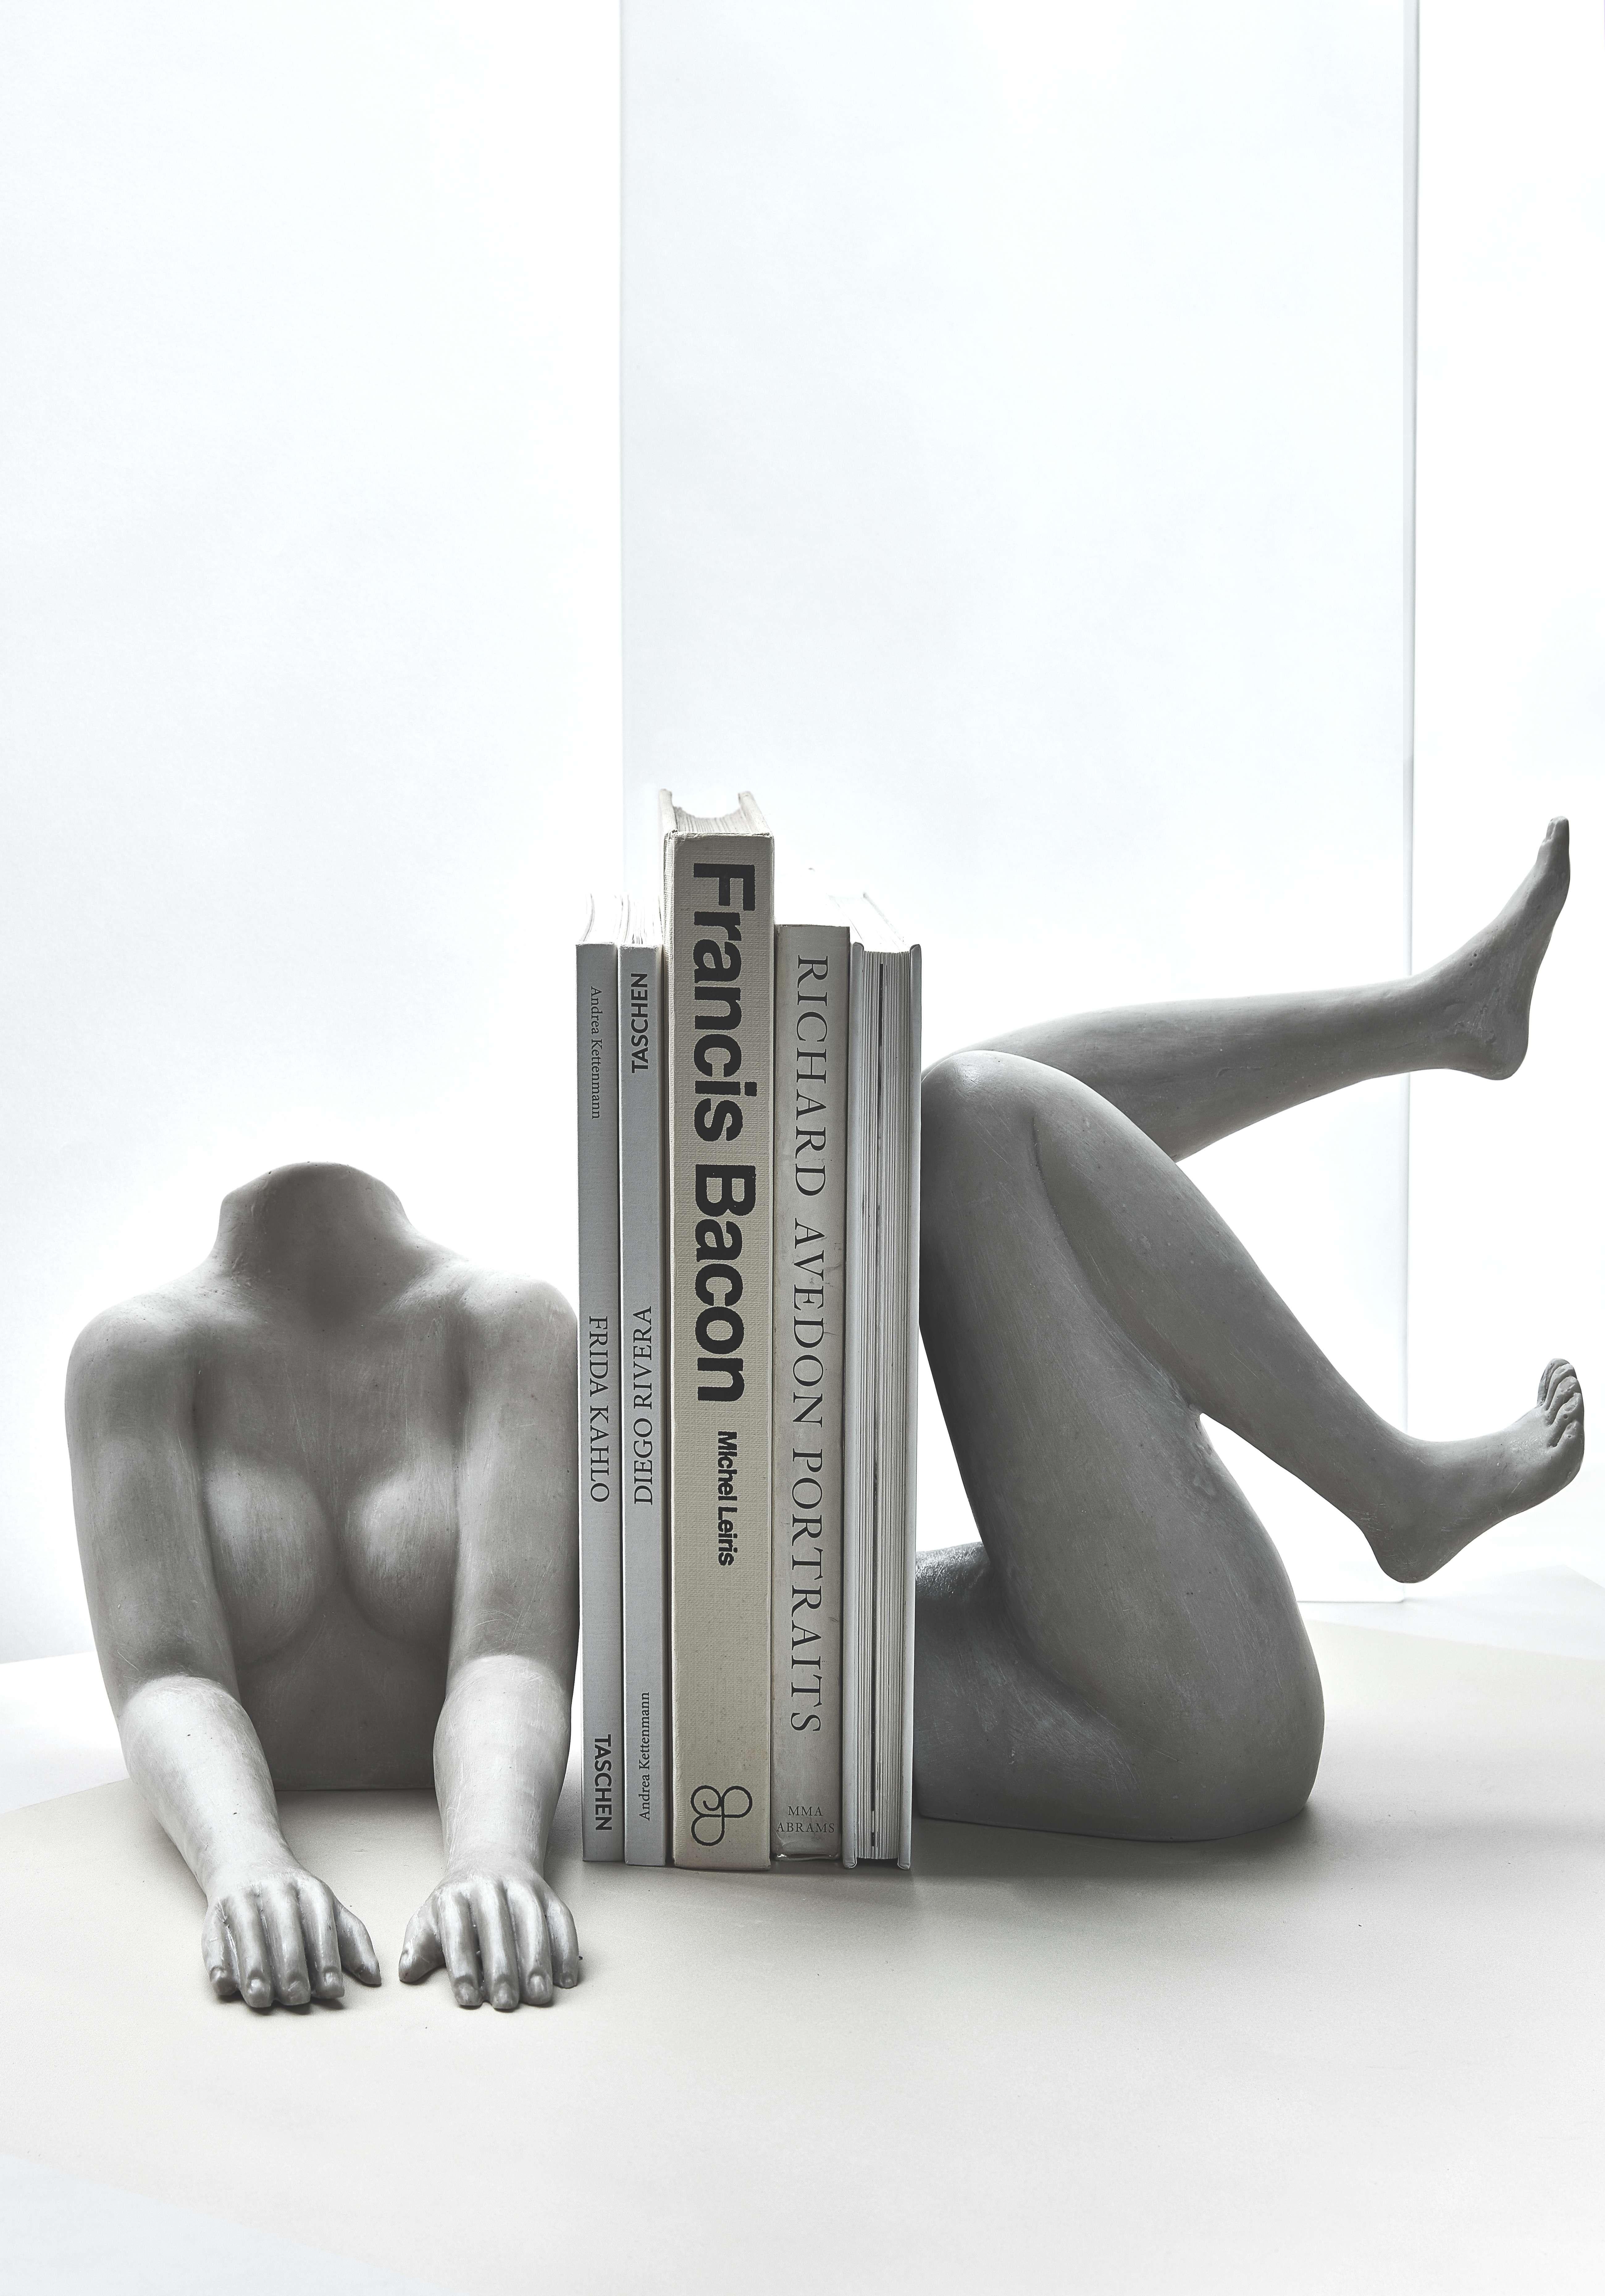 Colombian Il Corpo Sculptural Bookends Portraying Female Body Hand Crafted Resin Stone For Sale